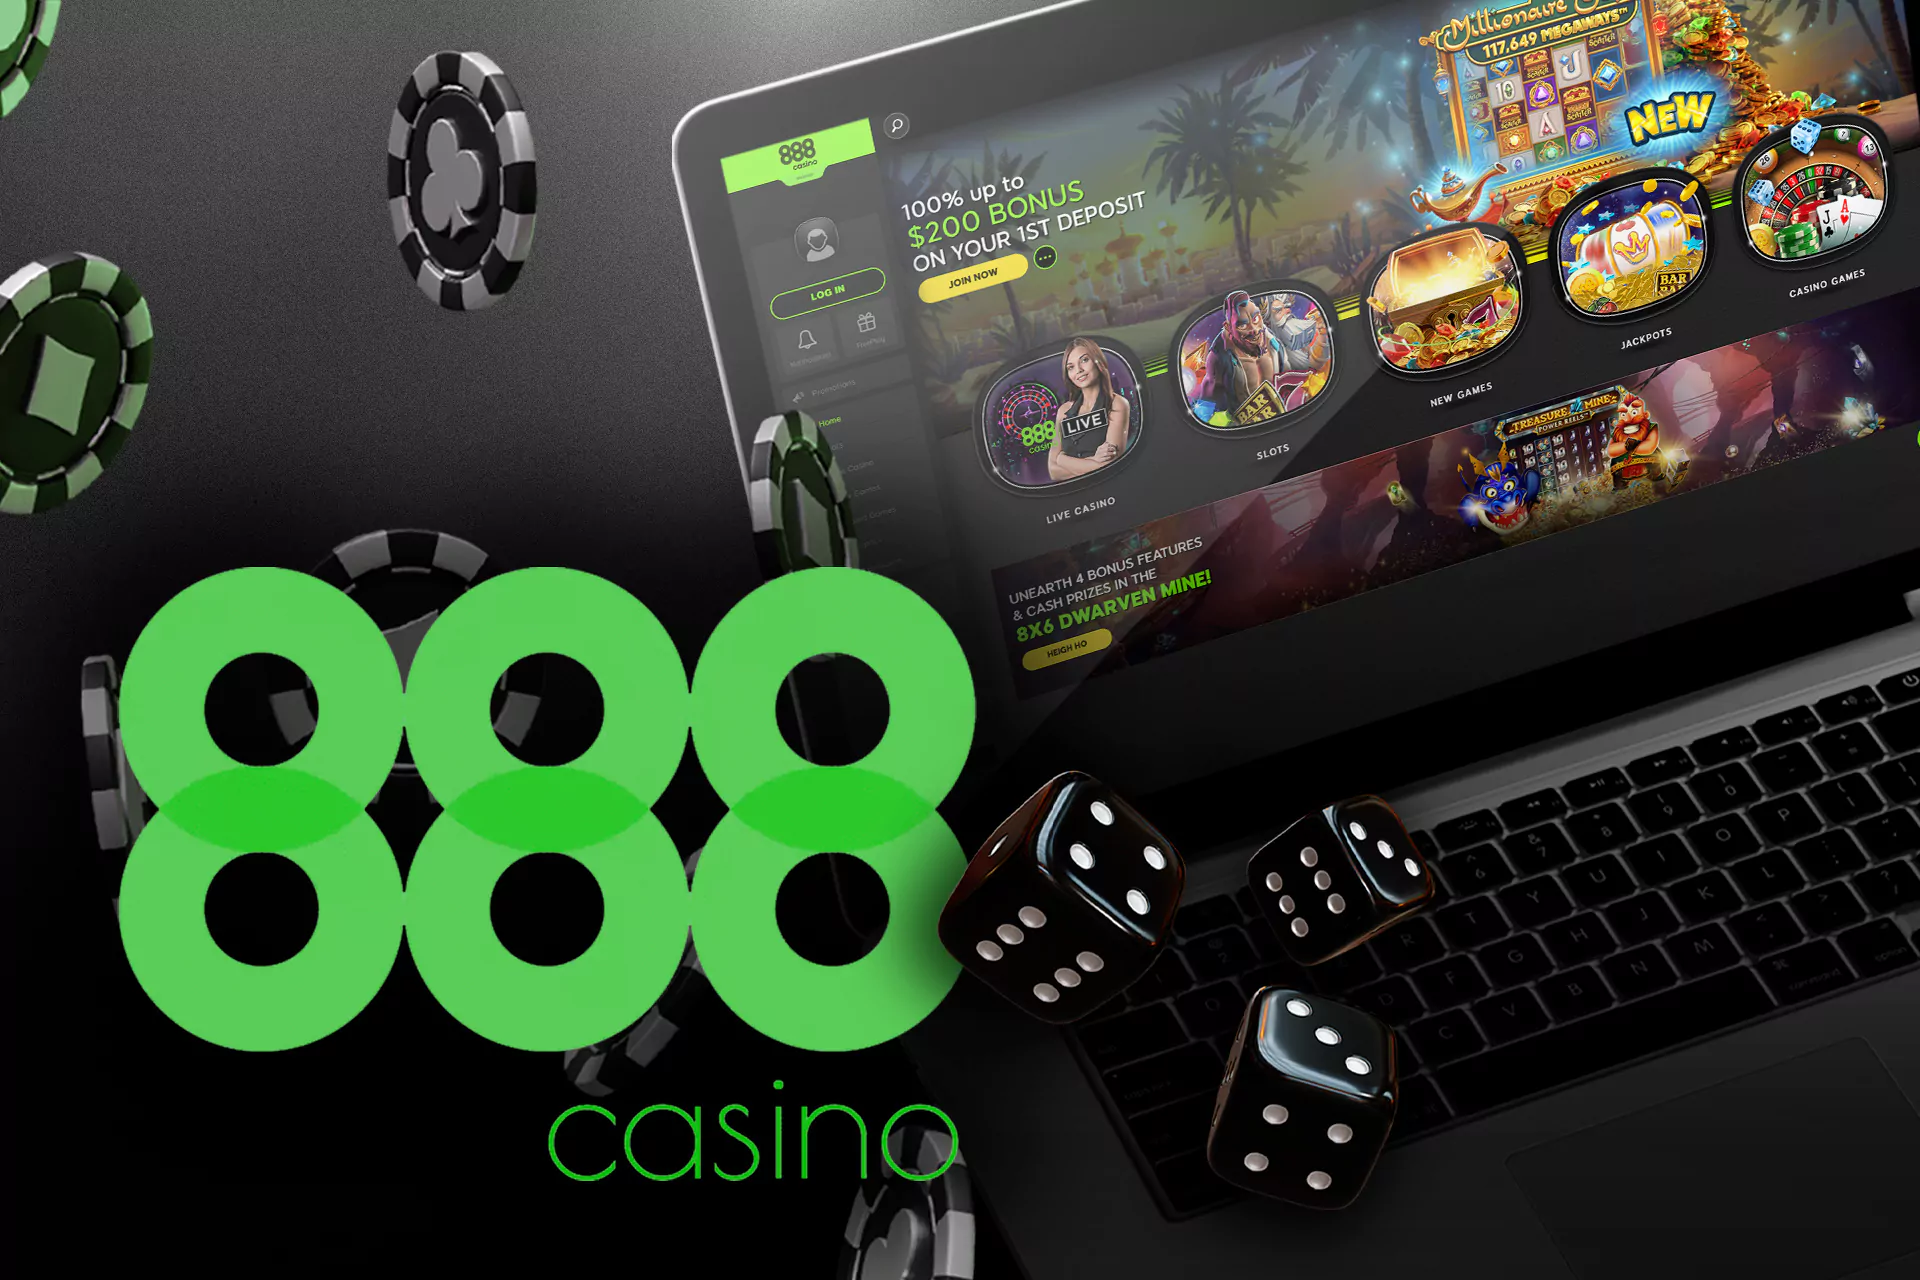 In the 888casino you can play slots or table games with a live dealer.